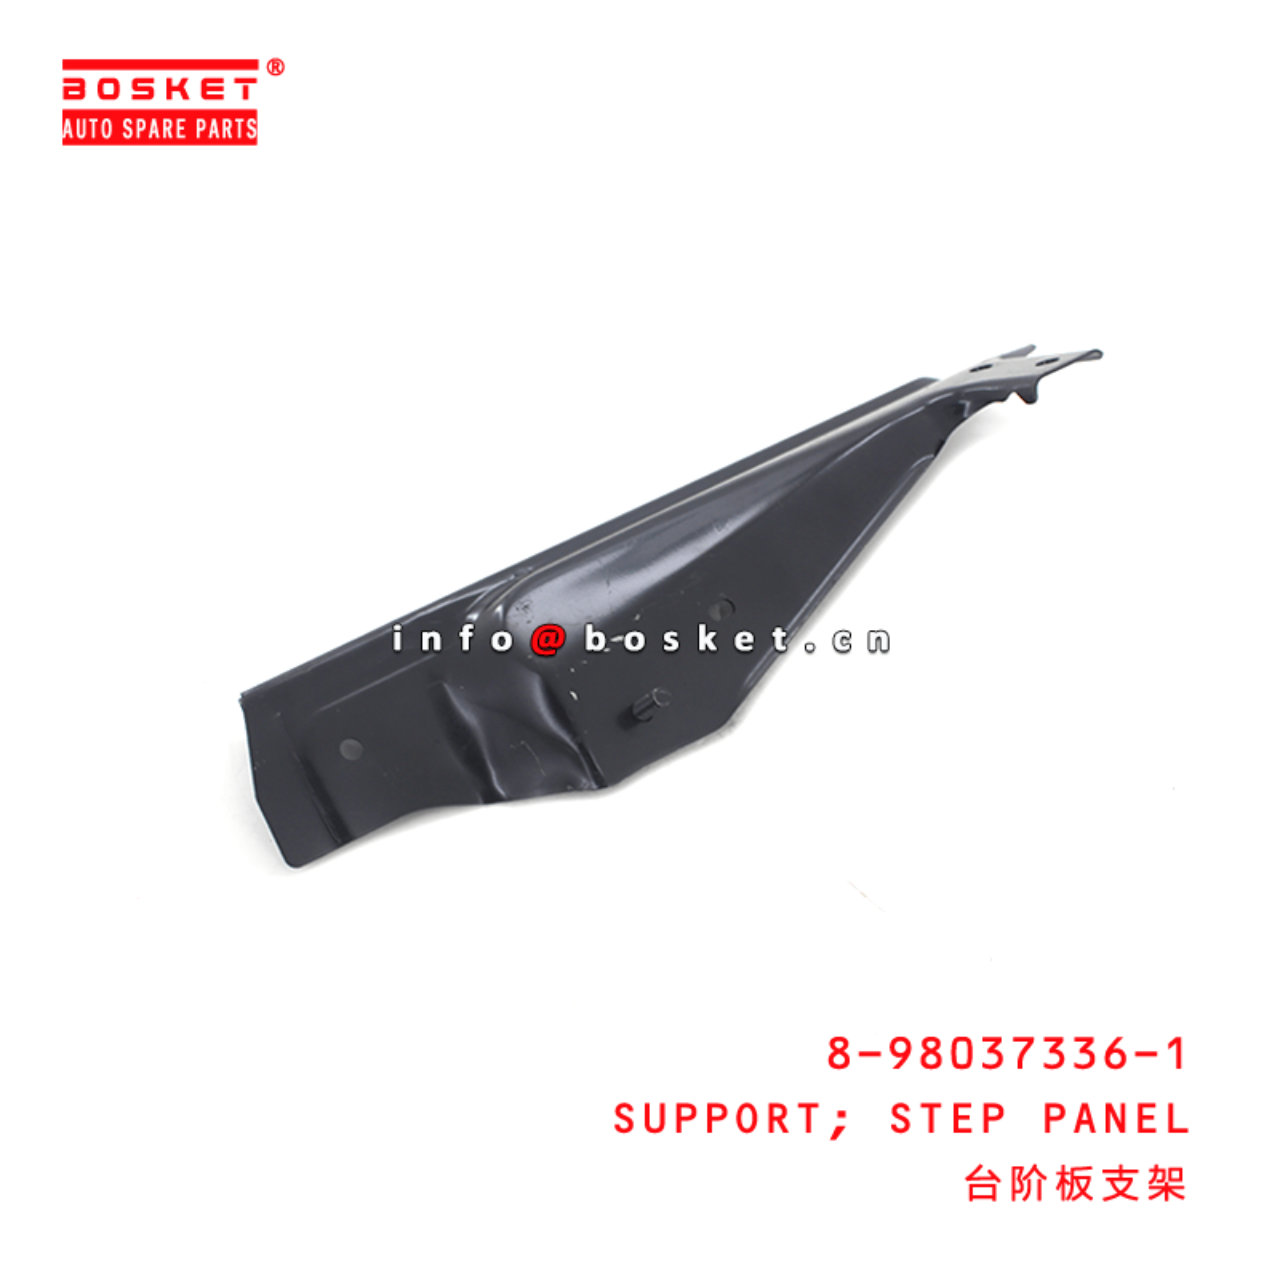  8-98037336-1 Step Panel Support 8980373361 Suitable for ISUZU VC46